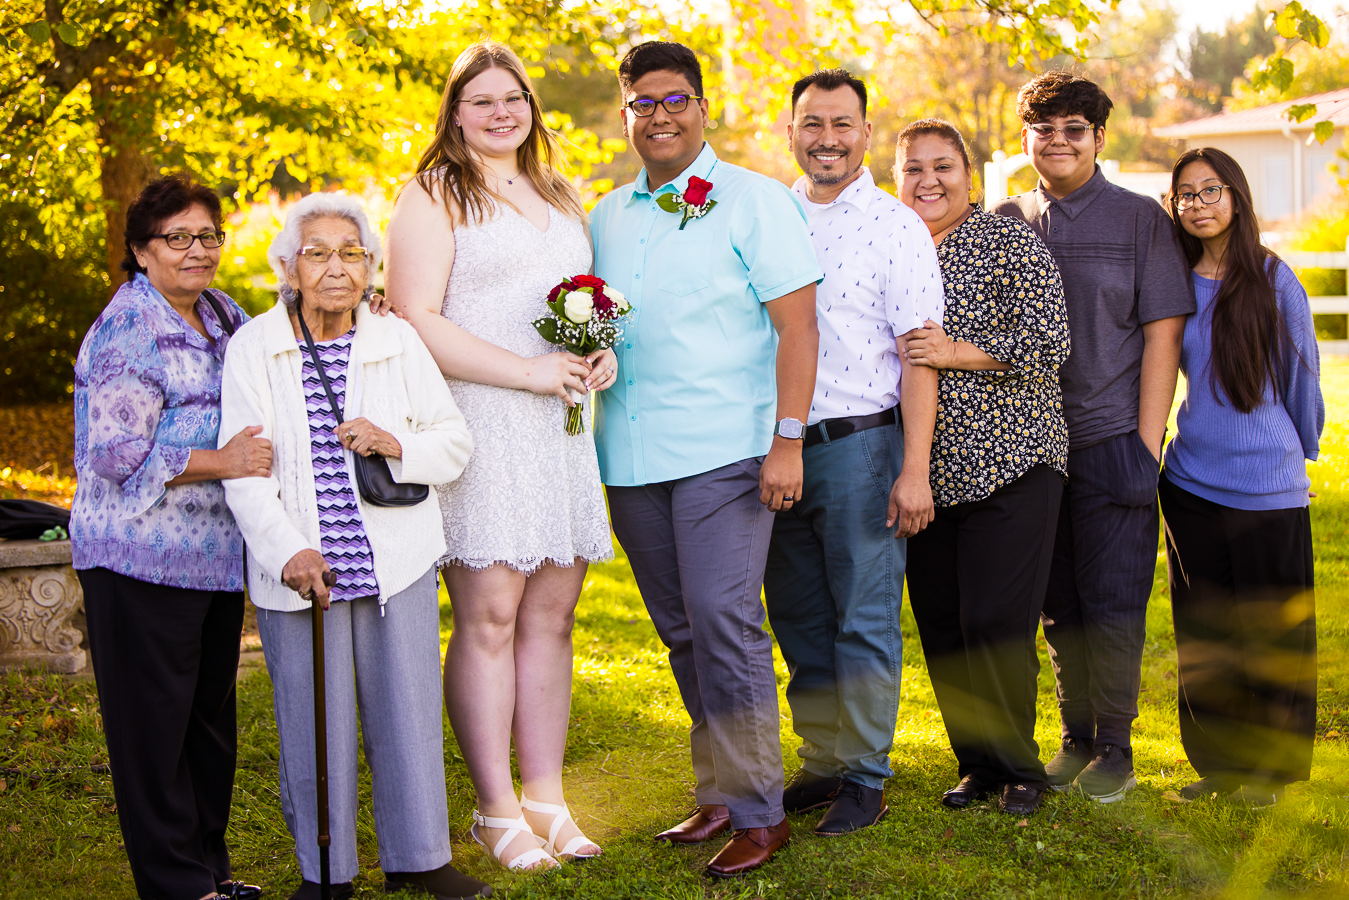 spencerville maryland family photographer, lisa rhinehart, captures this traditional family portrait of the couple with their family after their intimate wedding ceremony at the cedar ridge community church 